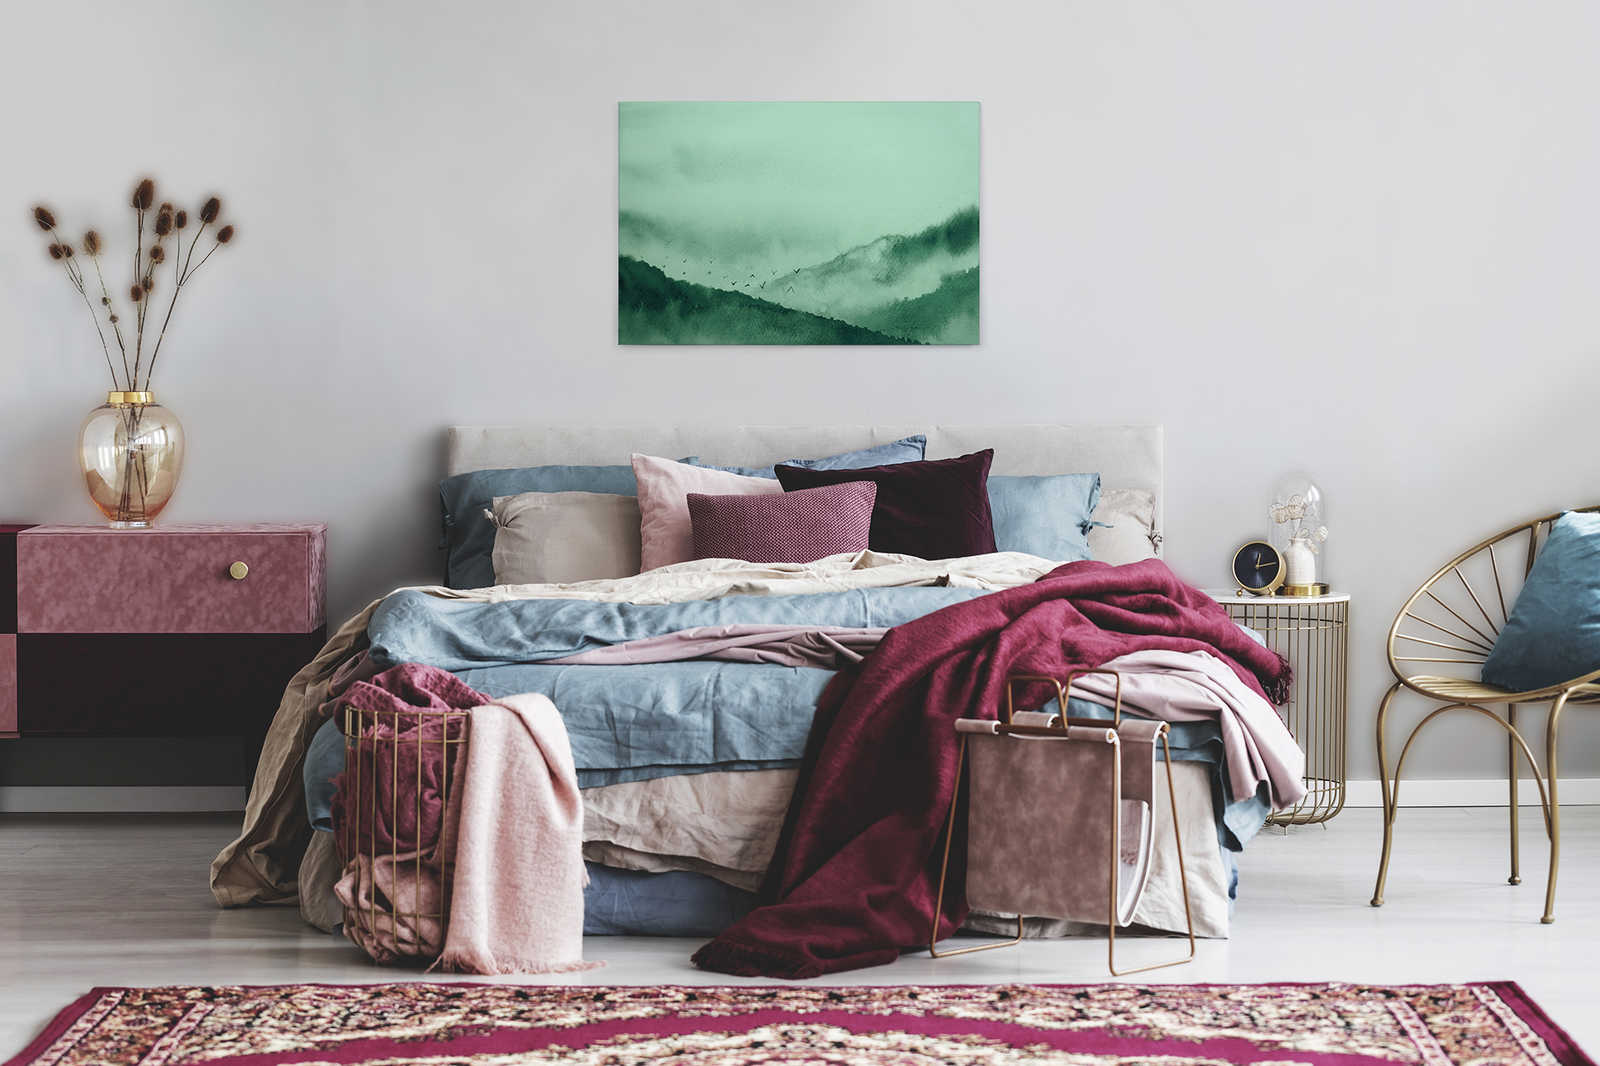             Canvas with foggy landscape in painting style | green, black - 0.90 m x 0.60 m
        